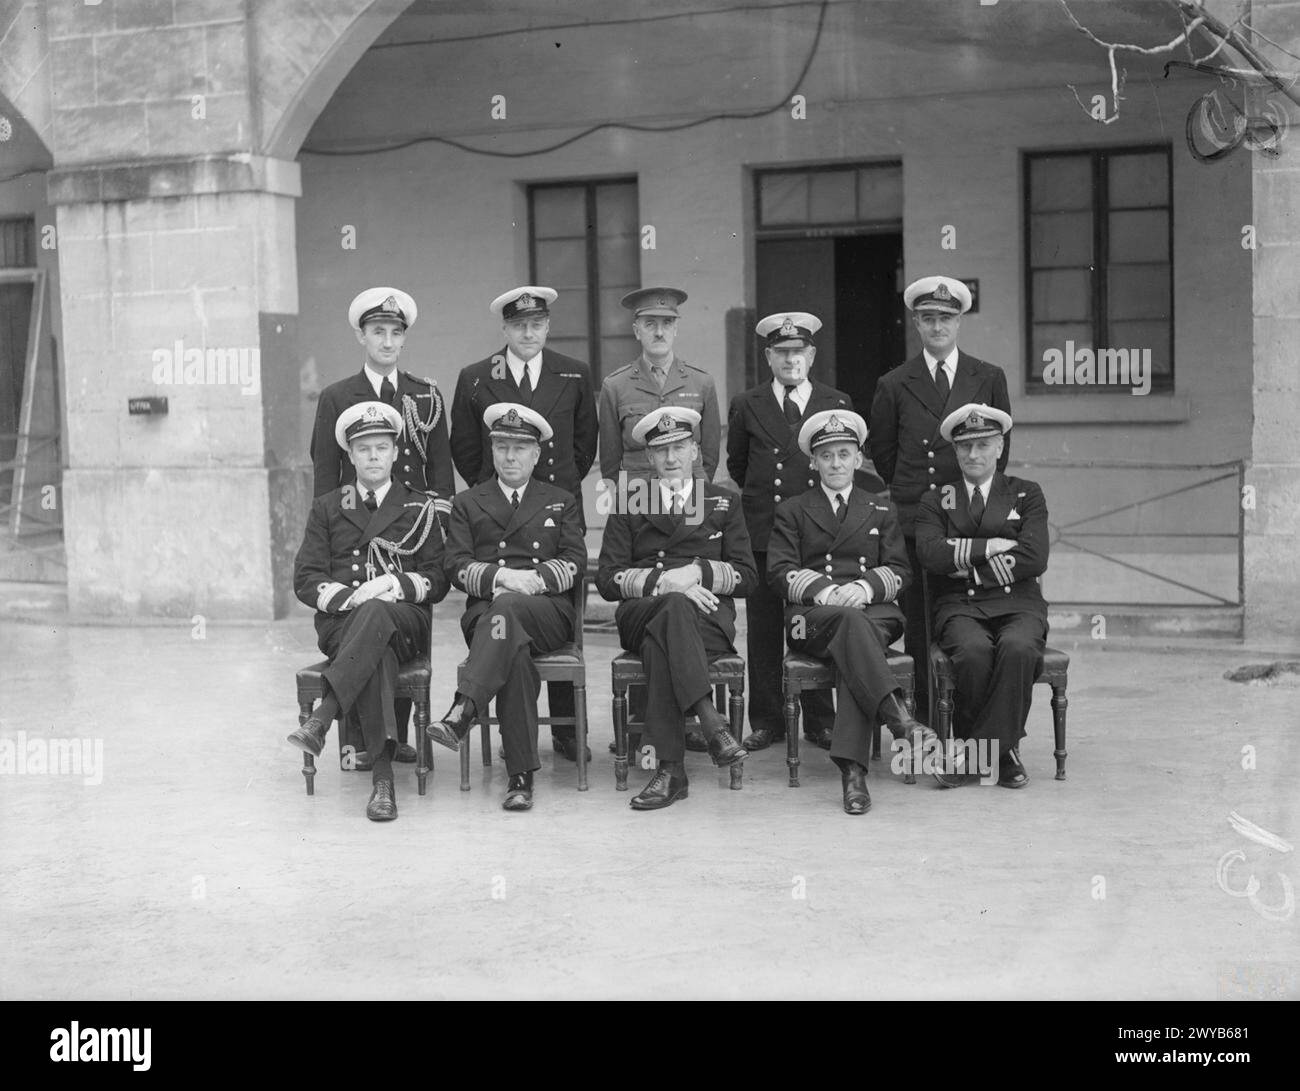 ADMIRAL SIR WILBRAHAM FORD AND HIS STAFF BEFORE HE LEFT MALTA TO BECOME C IN C ROSYTH. 1941, MALTA. - Admiral Sir Wilbraham Ford with a group of Naval Officers at Malta. Left to right: back row: Lieut Cdr W H B Wallace; Lieut Cdr H R B Howell; Major O E Haworth-Booth, RM; Lieut Cdr G Finley-Day; Commander M J Evans. Front Row: Pay Cdr R H Johnson; Captain G W Wadham, Chief of Staff; Admiral Sir Wilbraham Ford, KCB, KBE; Eng Captain H E Lewis; Commander P H Calderson. , Stock Photo